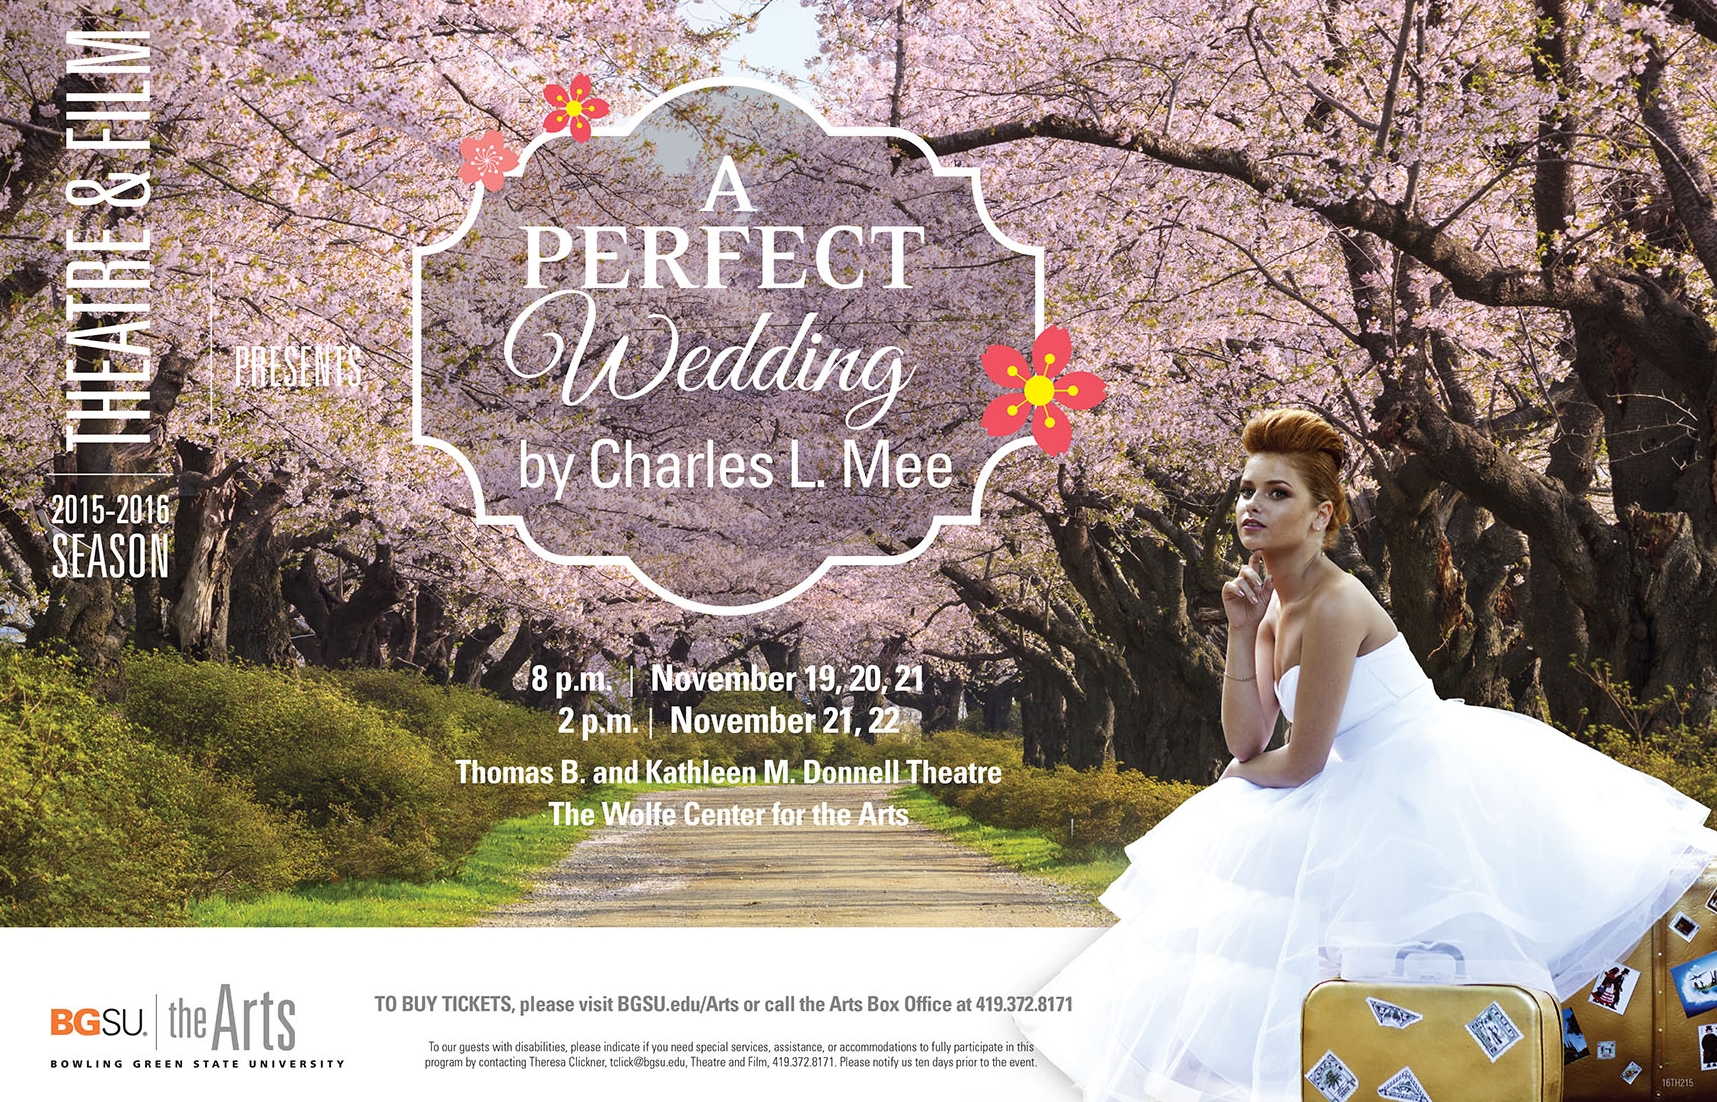 Poster for A Perfect Wedding containing a woman in a wedding dress sitting on a suitcase